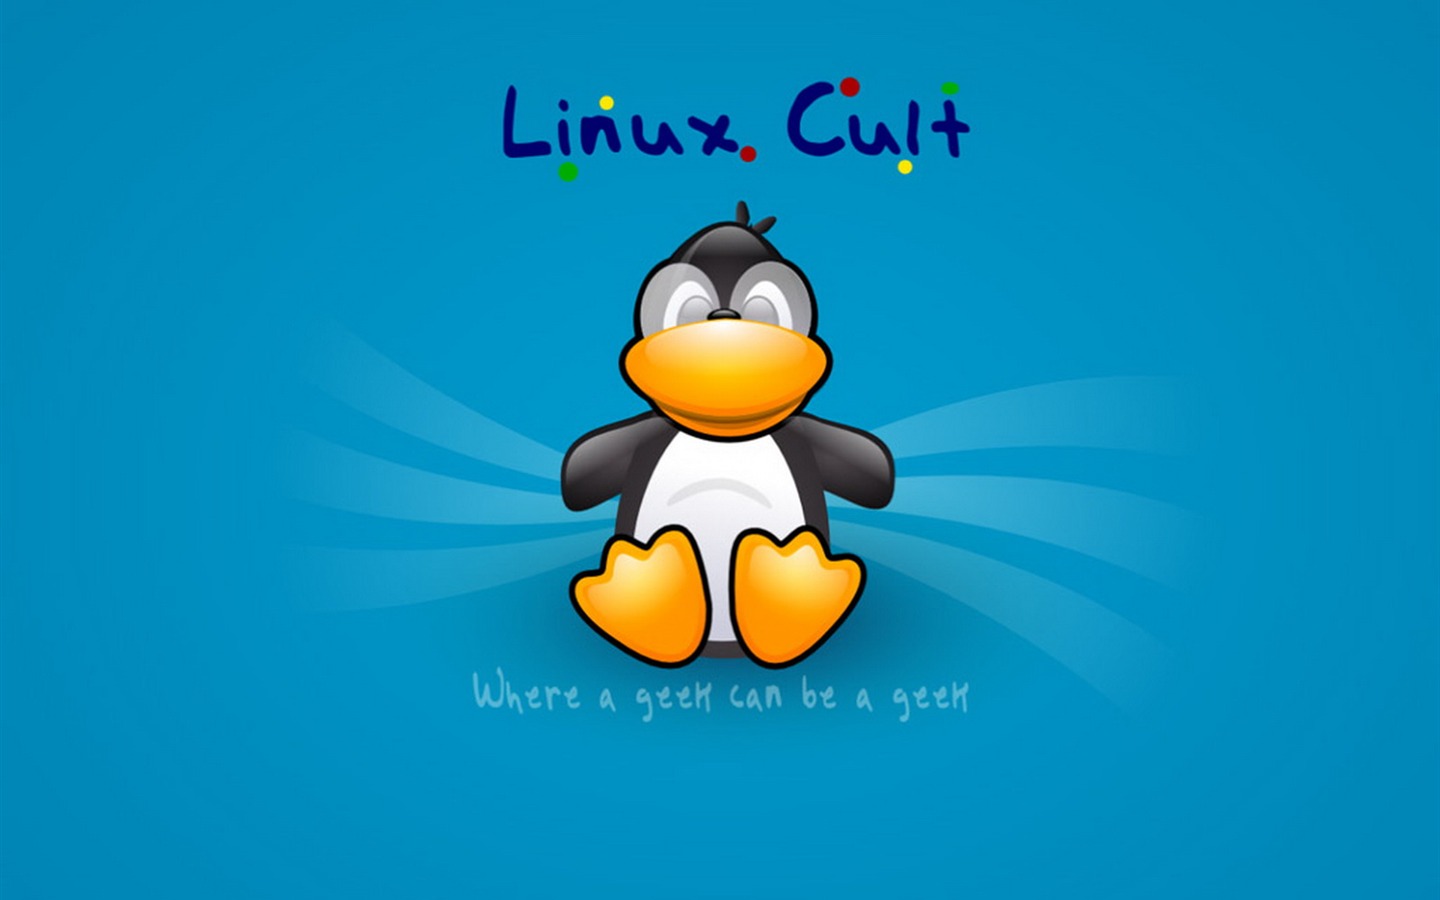 Linux tapety (3) #7 - 1440x900